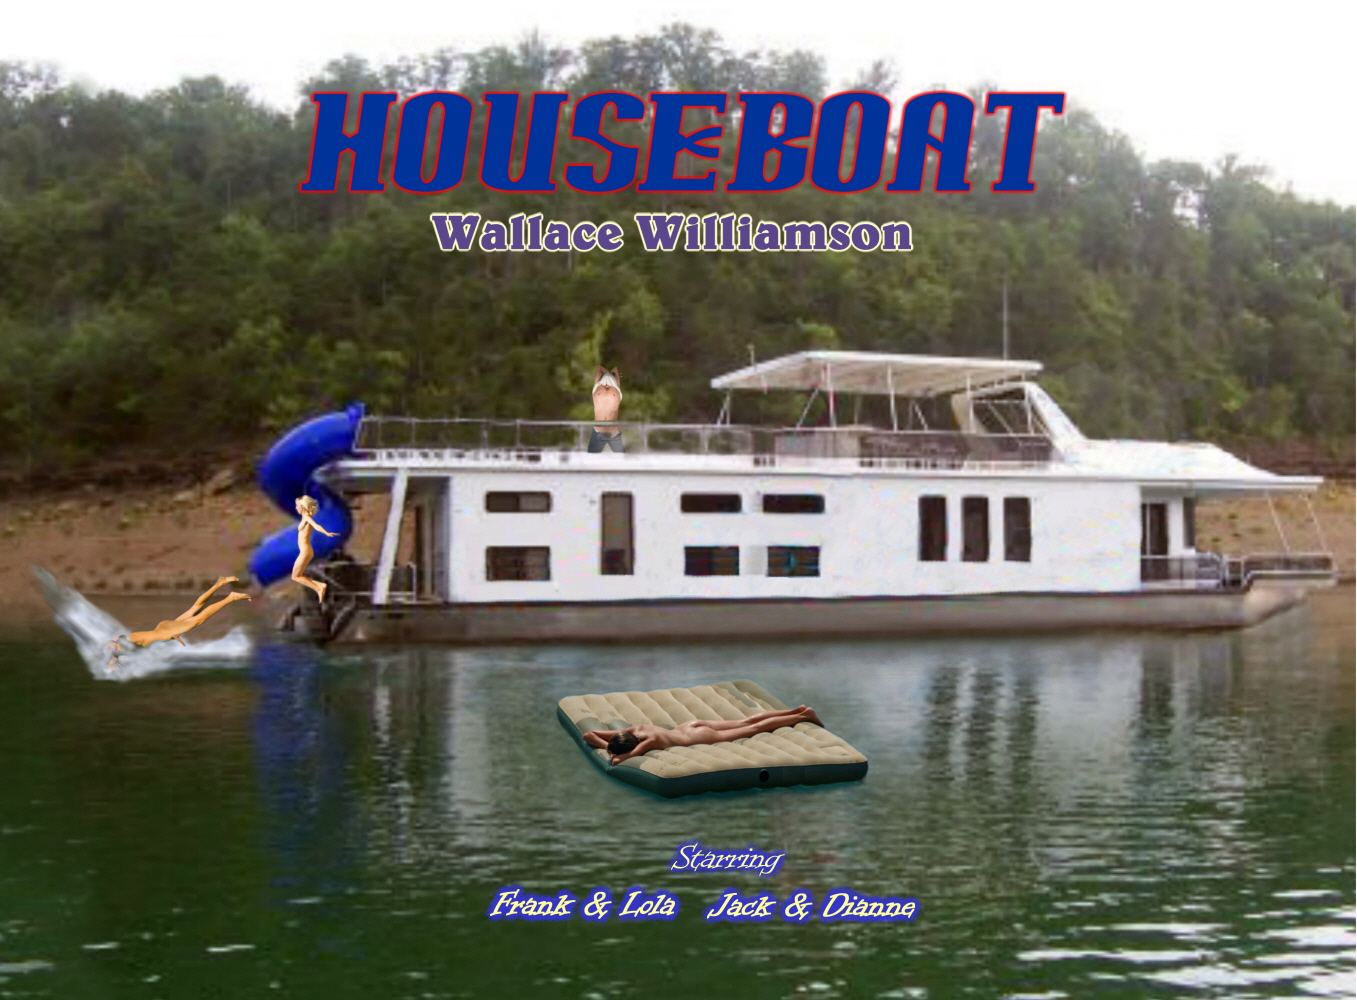 Here's The HouseBoat Cover Without Those Silly Words Covering Up The Good Stuff!!  Makes You Want 2 Read The Story, Doesn't It?  Click The Pic When You Forget Who's Who!!!